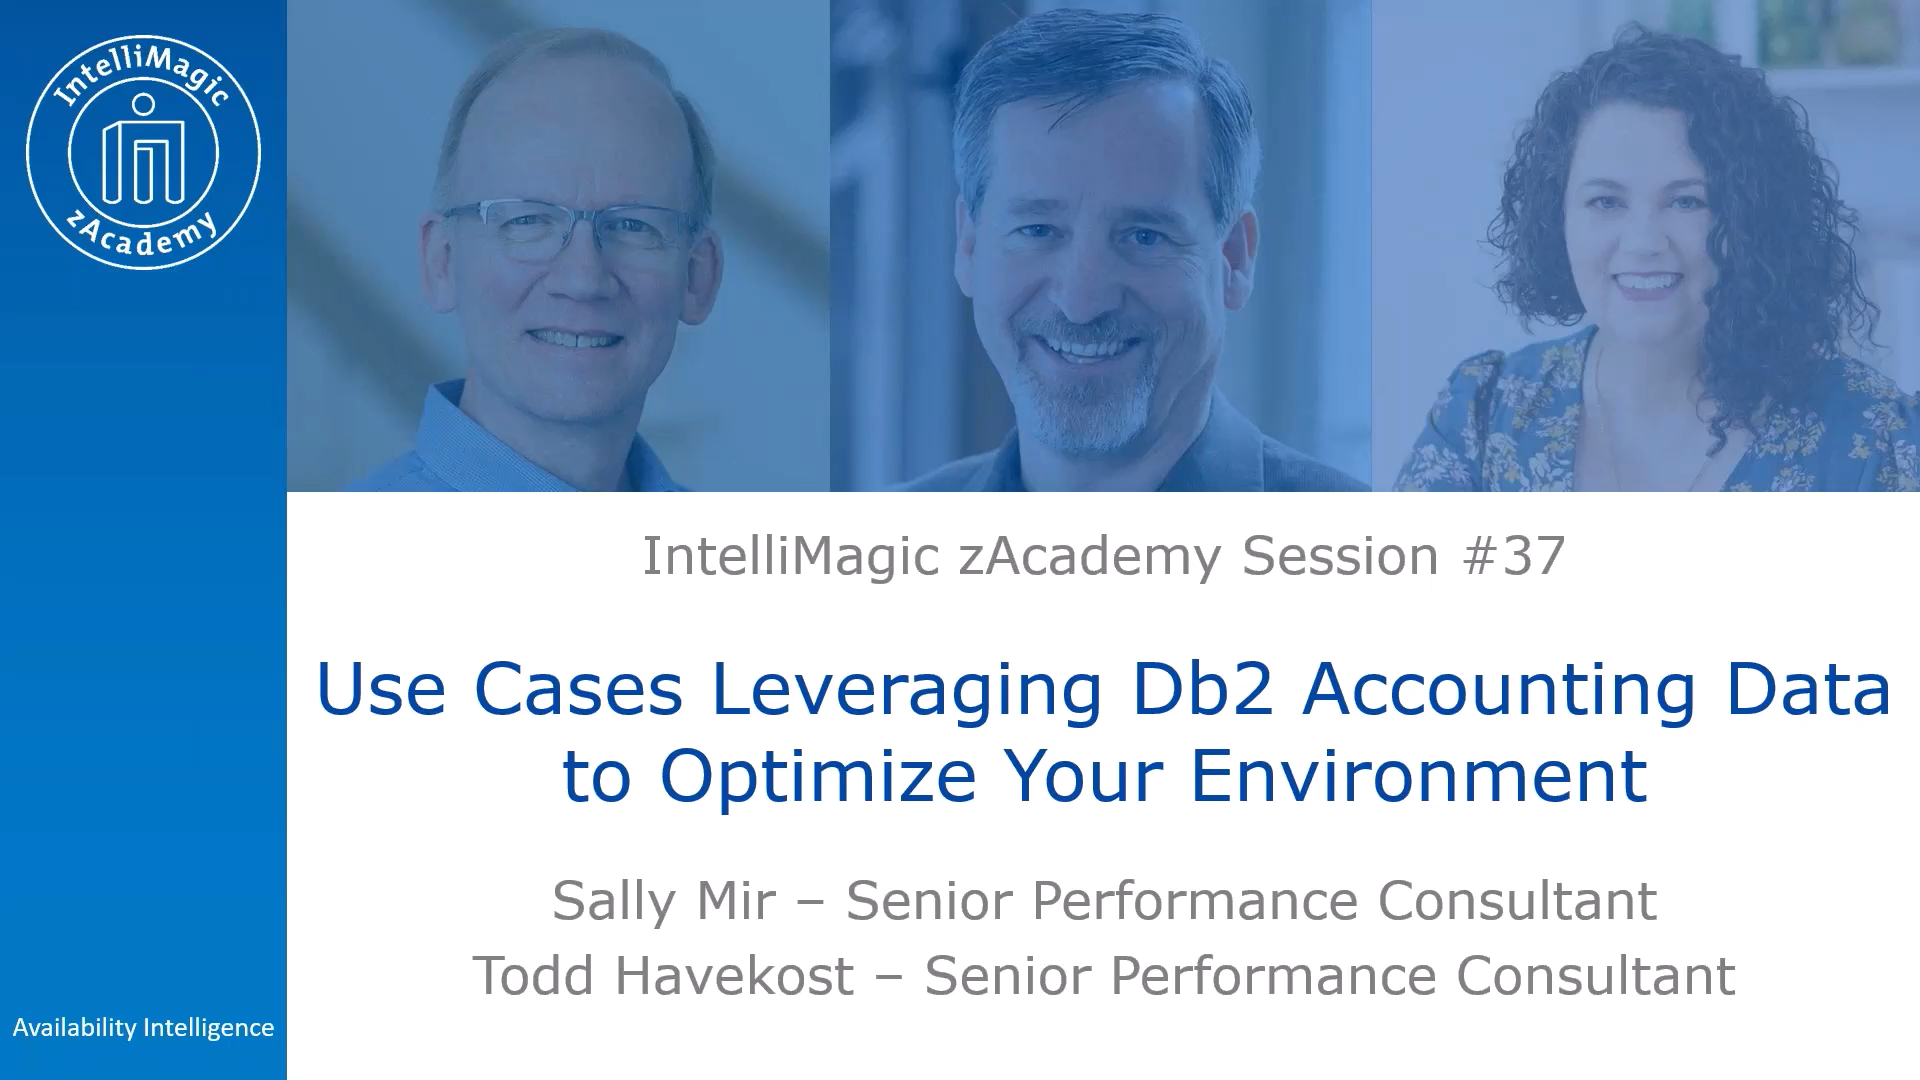 Use Cases Leveraging Db2 Accounting Data to Optimize your environment - zAcademy 37 thumbnail